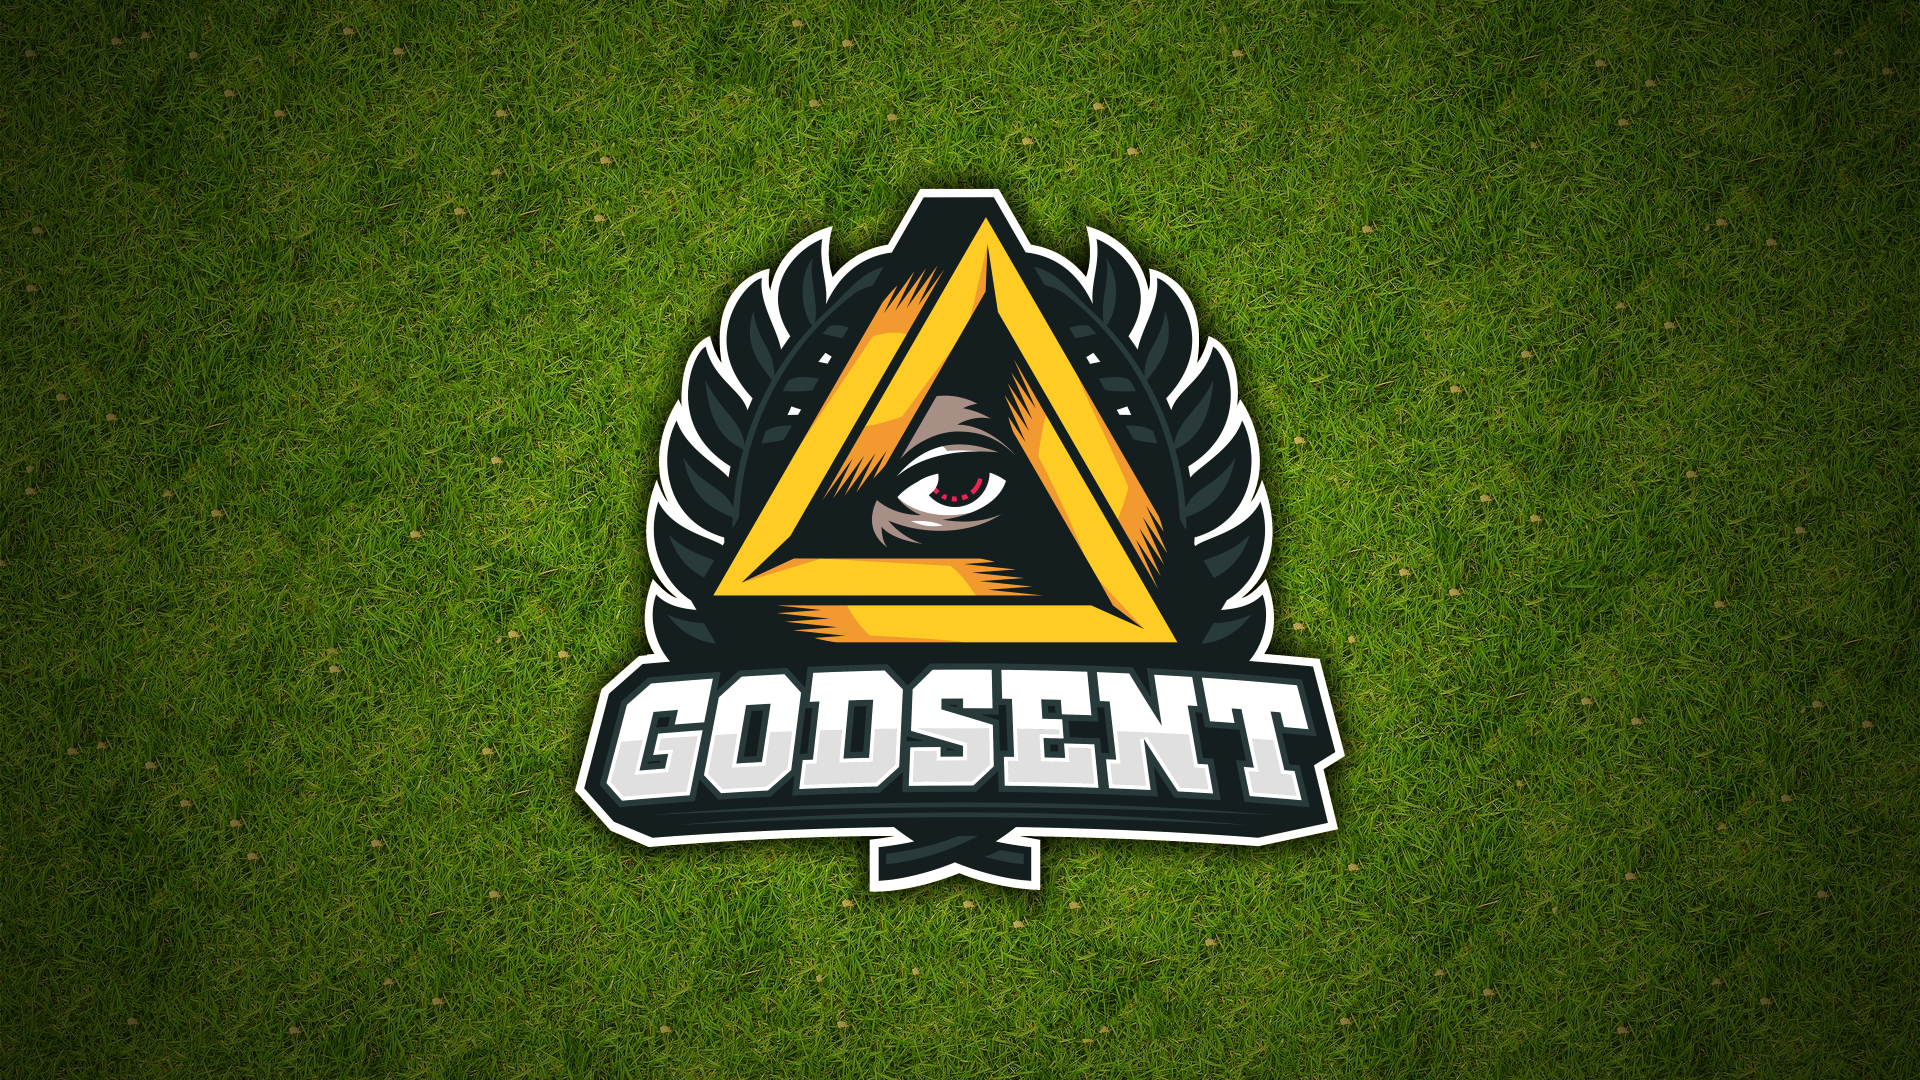 General 1920x1080 Counter-Strike: Global Offensive GODSENT PC gaming logo